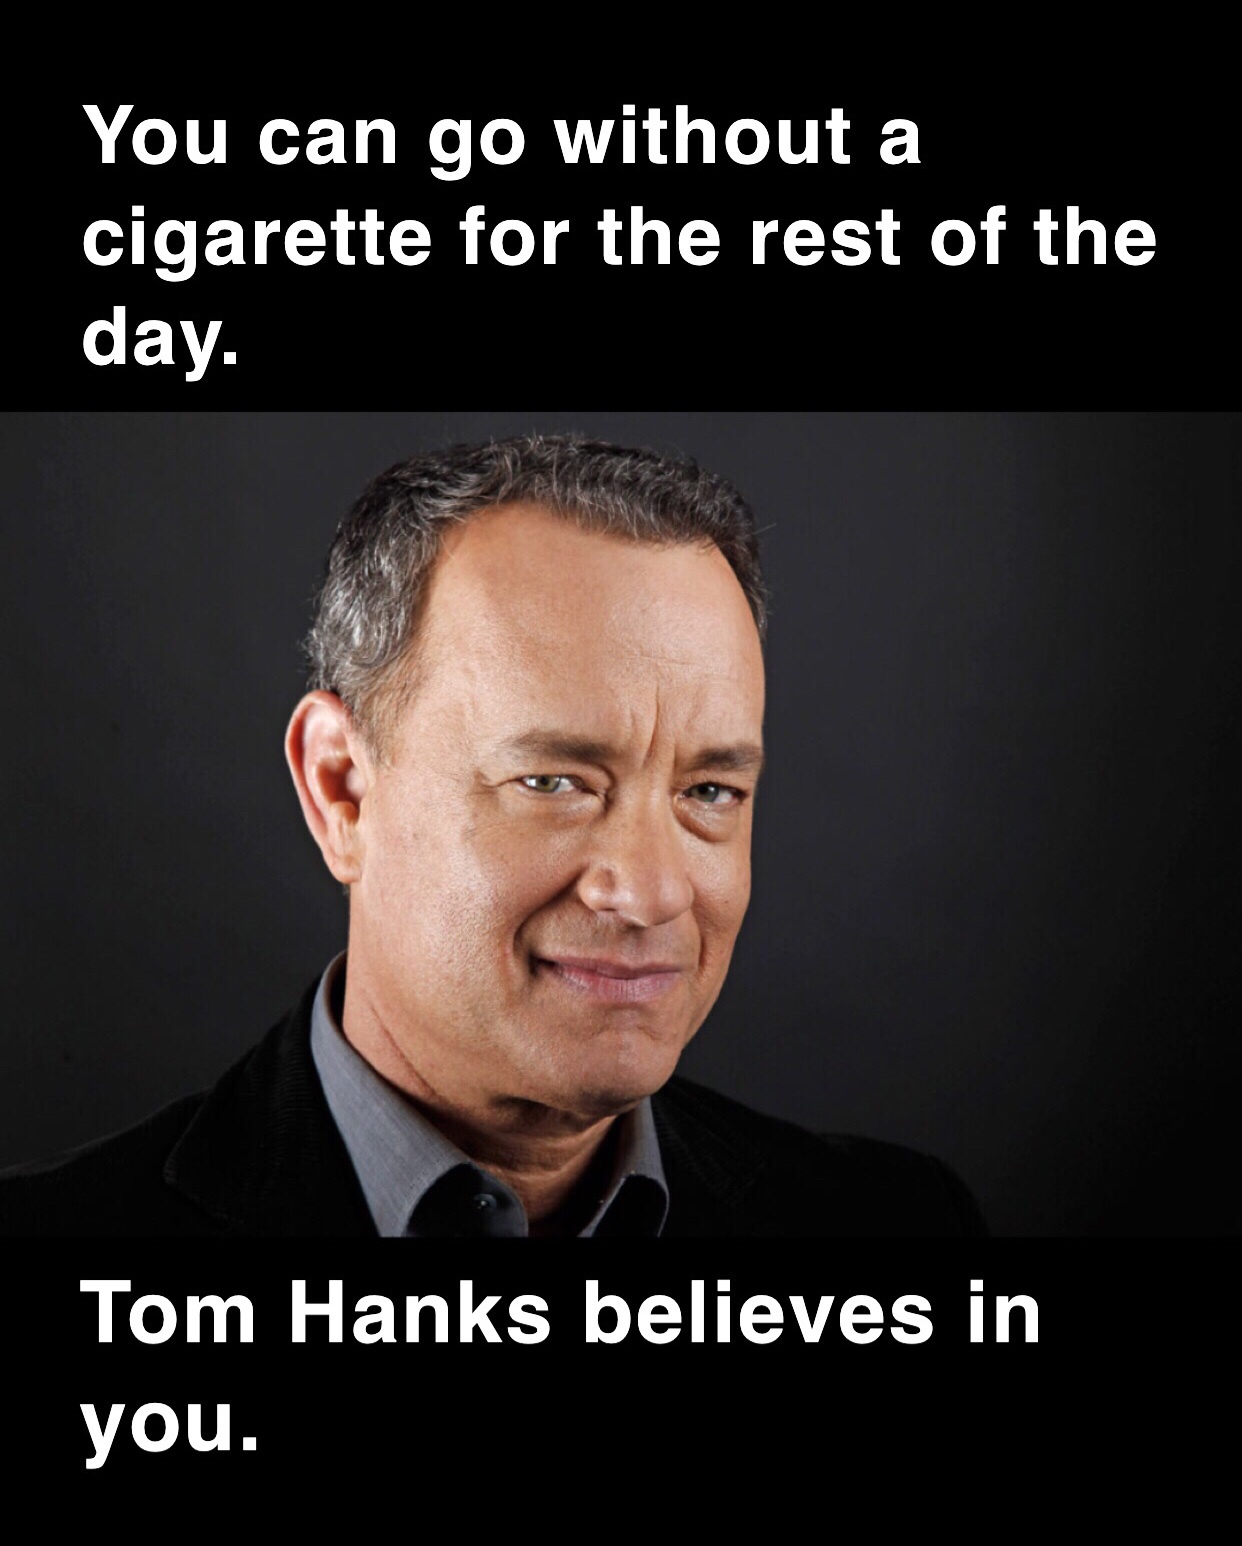 tom hanks and jim hanks - You can go without a cigarette for the rest of the day. Tom Hanks believes in you.